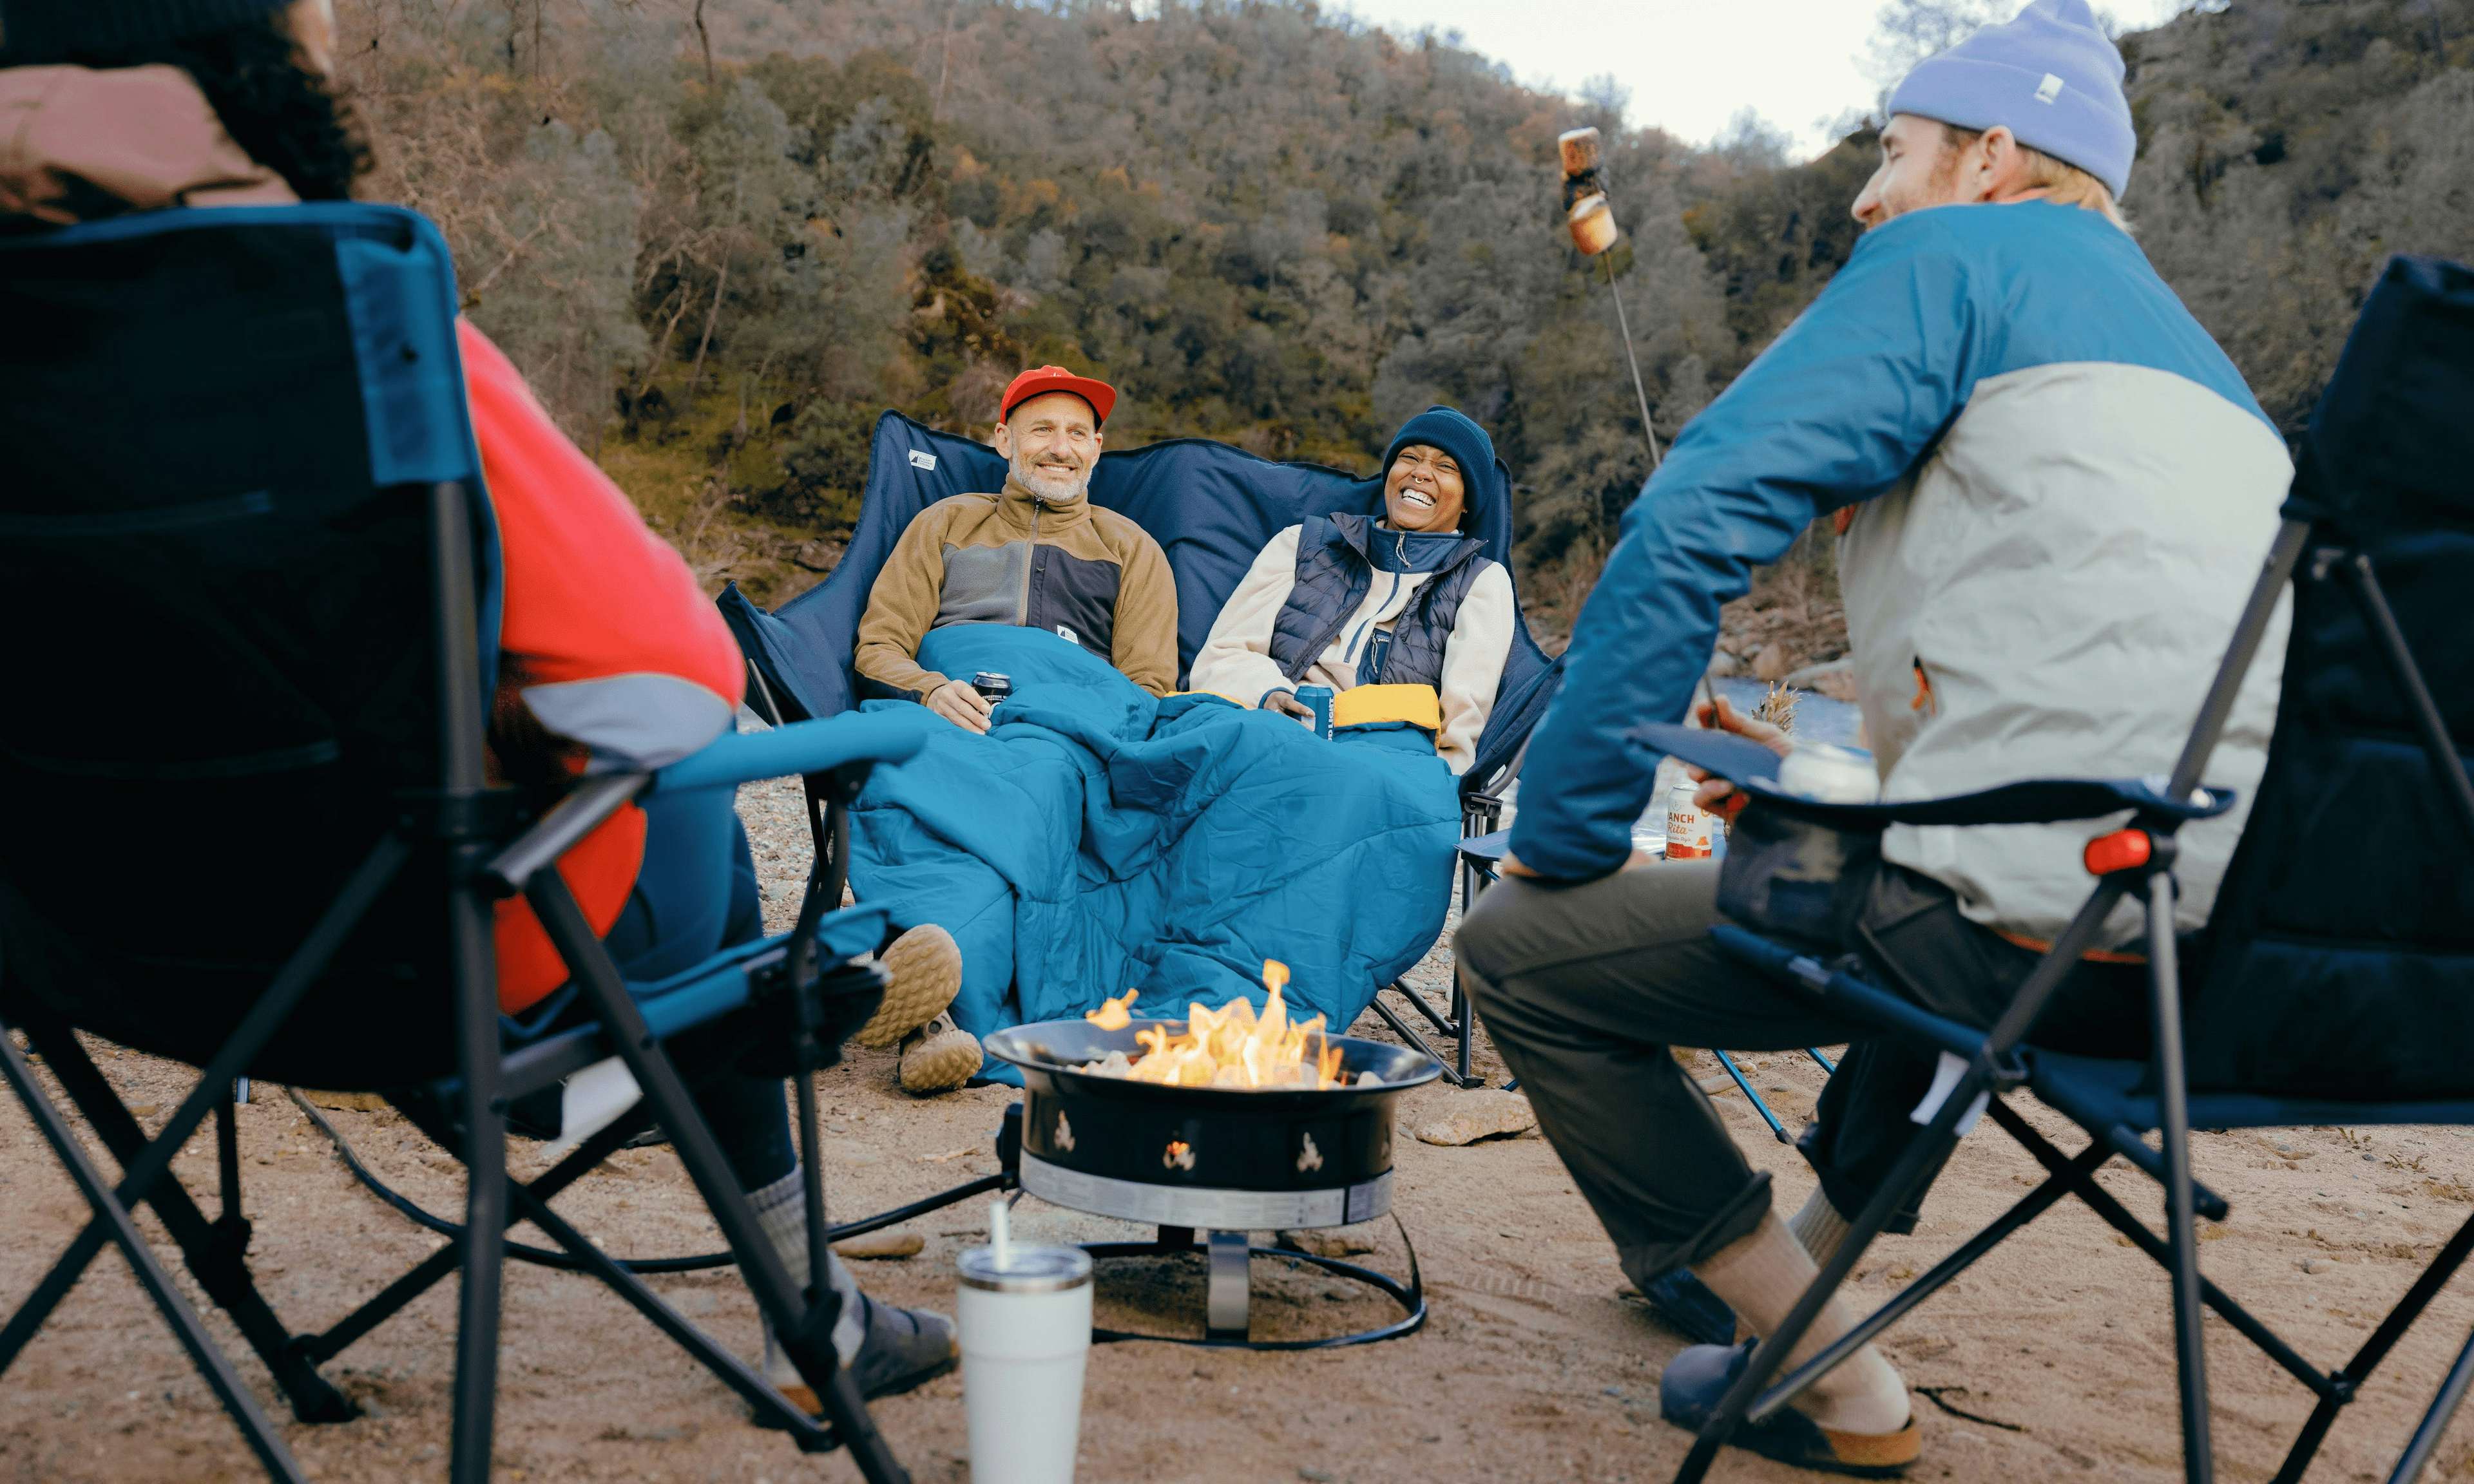 Four campers sitting outside on chairs with a propane fire pit.